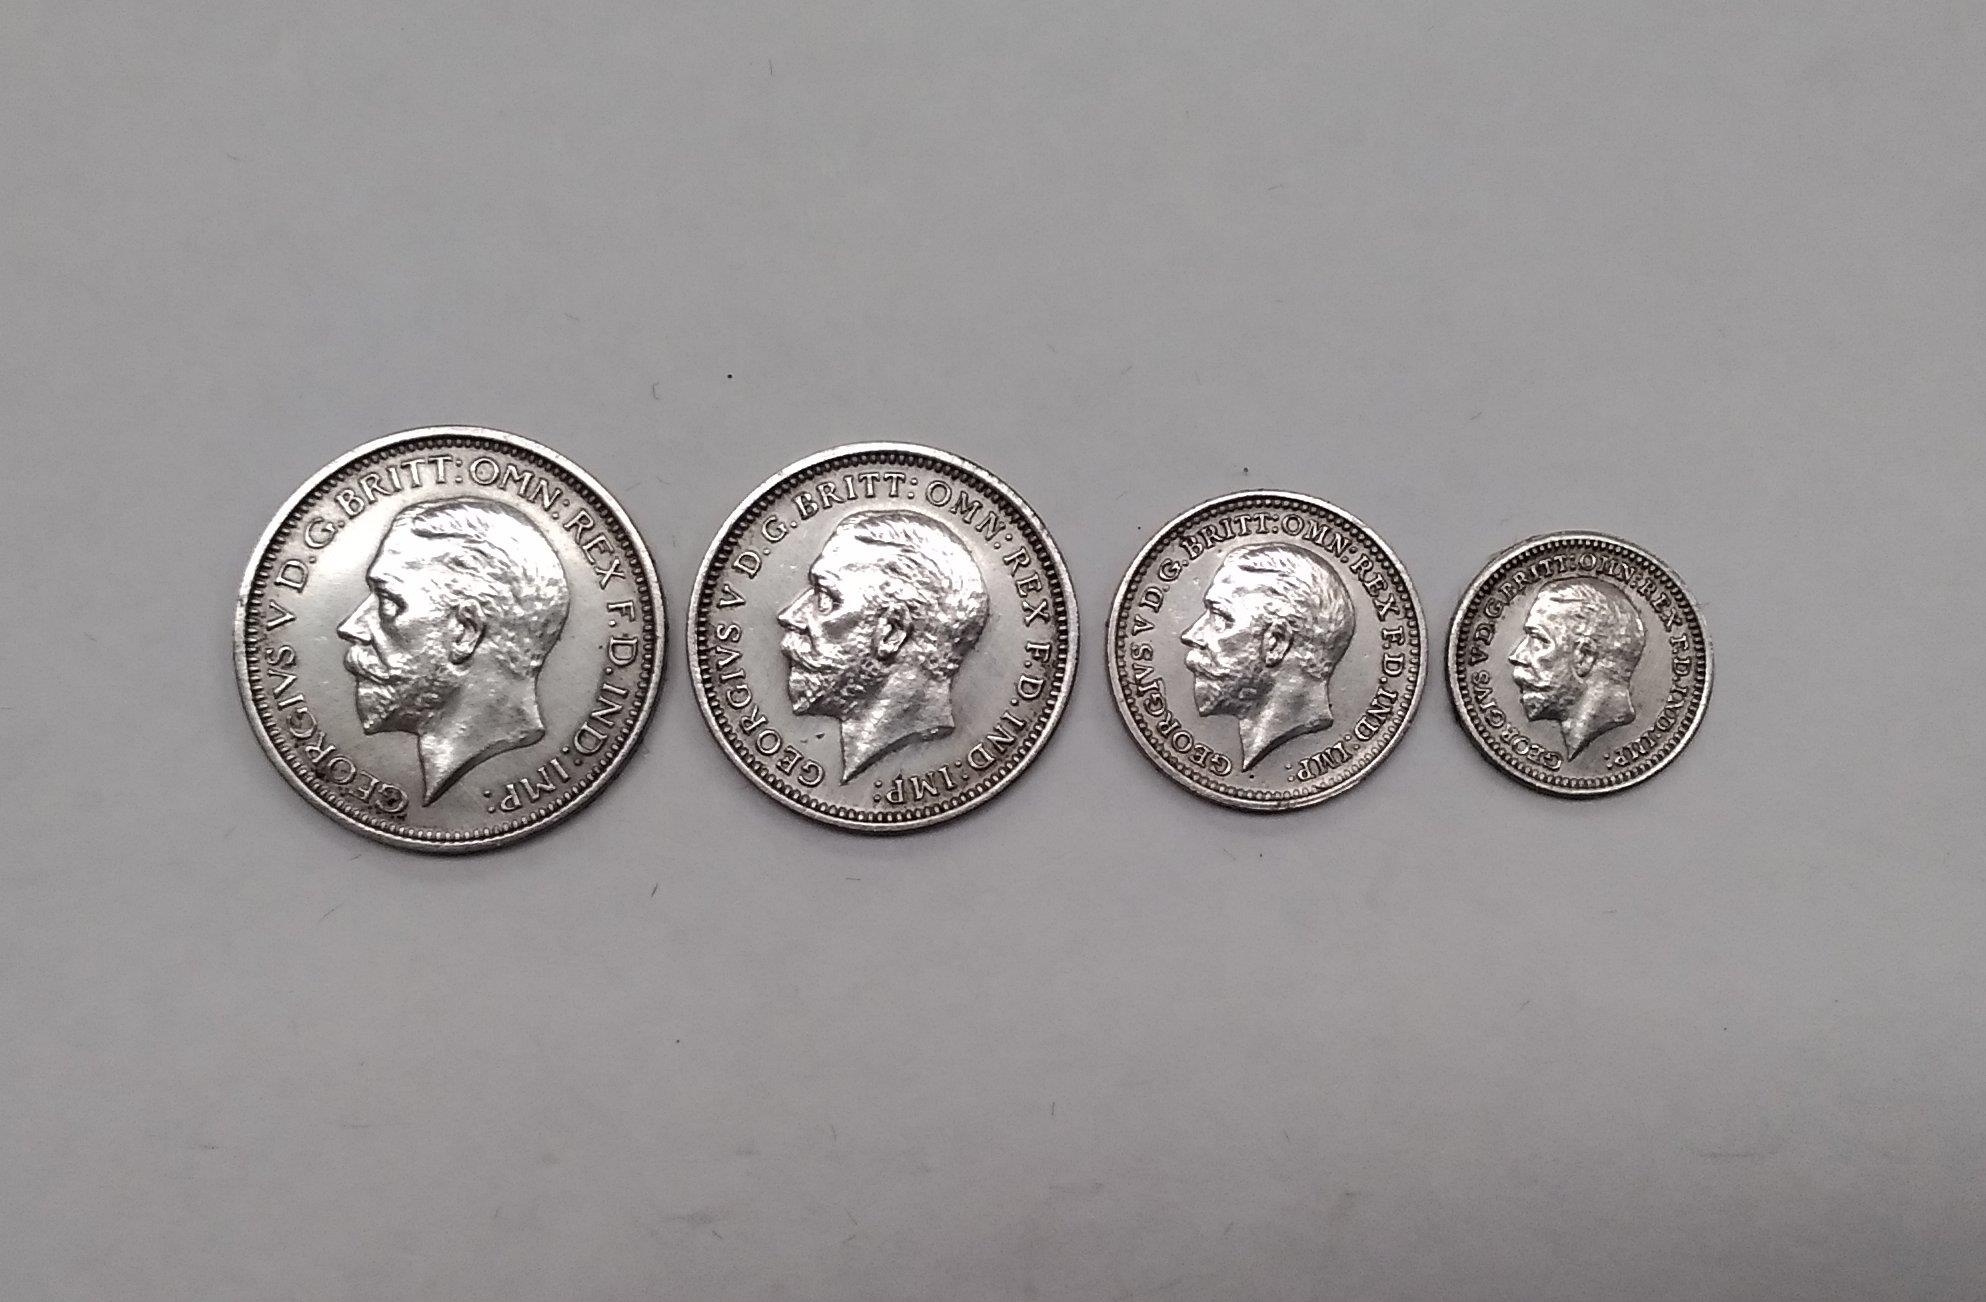 A George V (1910-1936) 1935 Maundy set in a modern Coincraft case